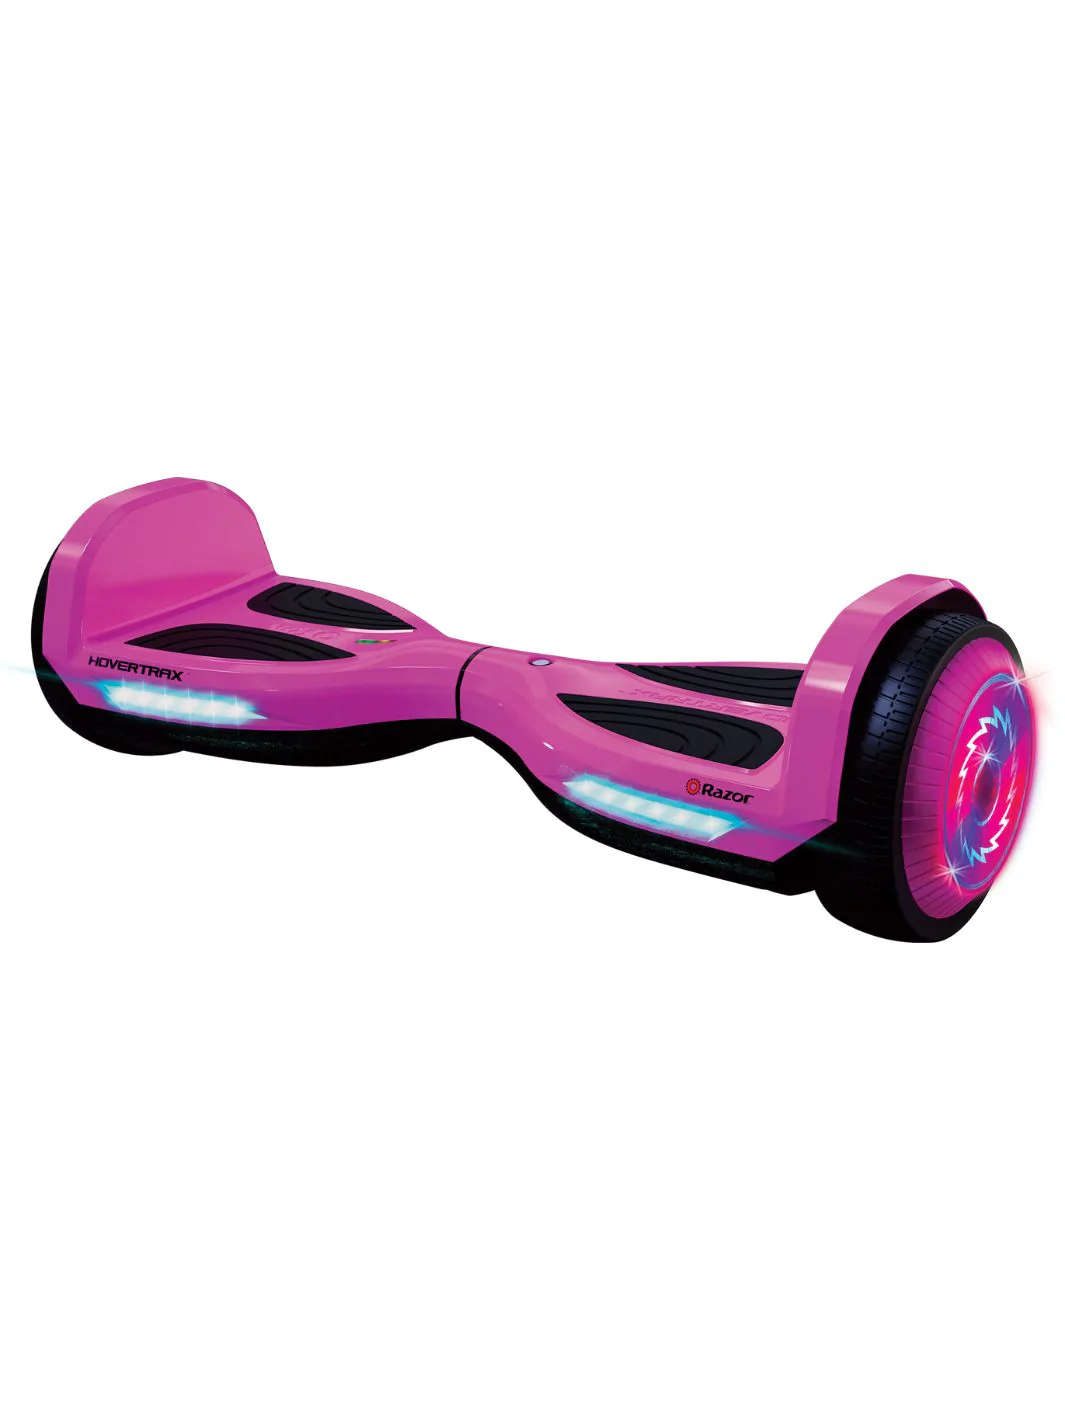 Hovertrax Brights Pink